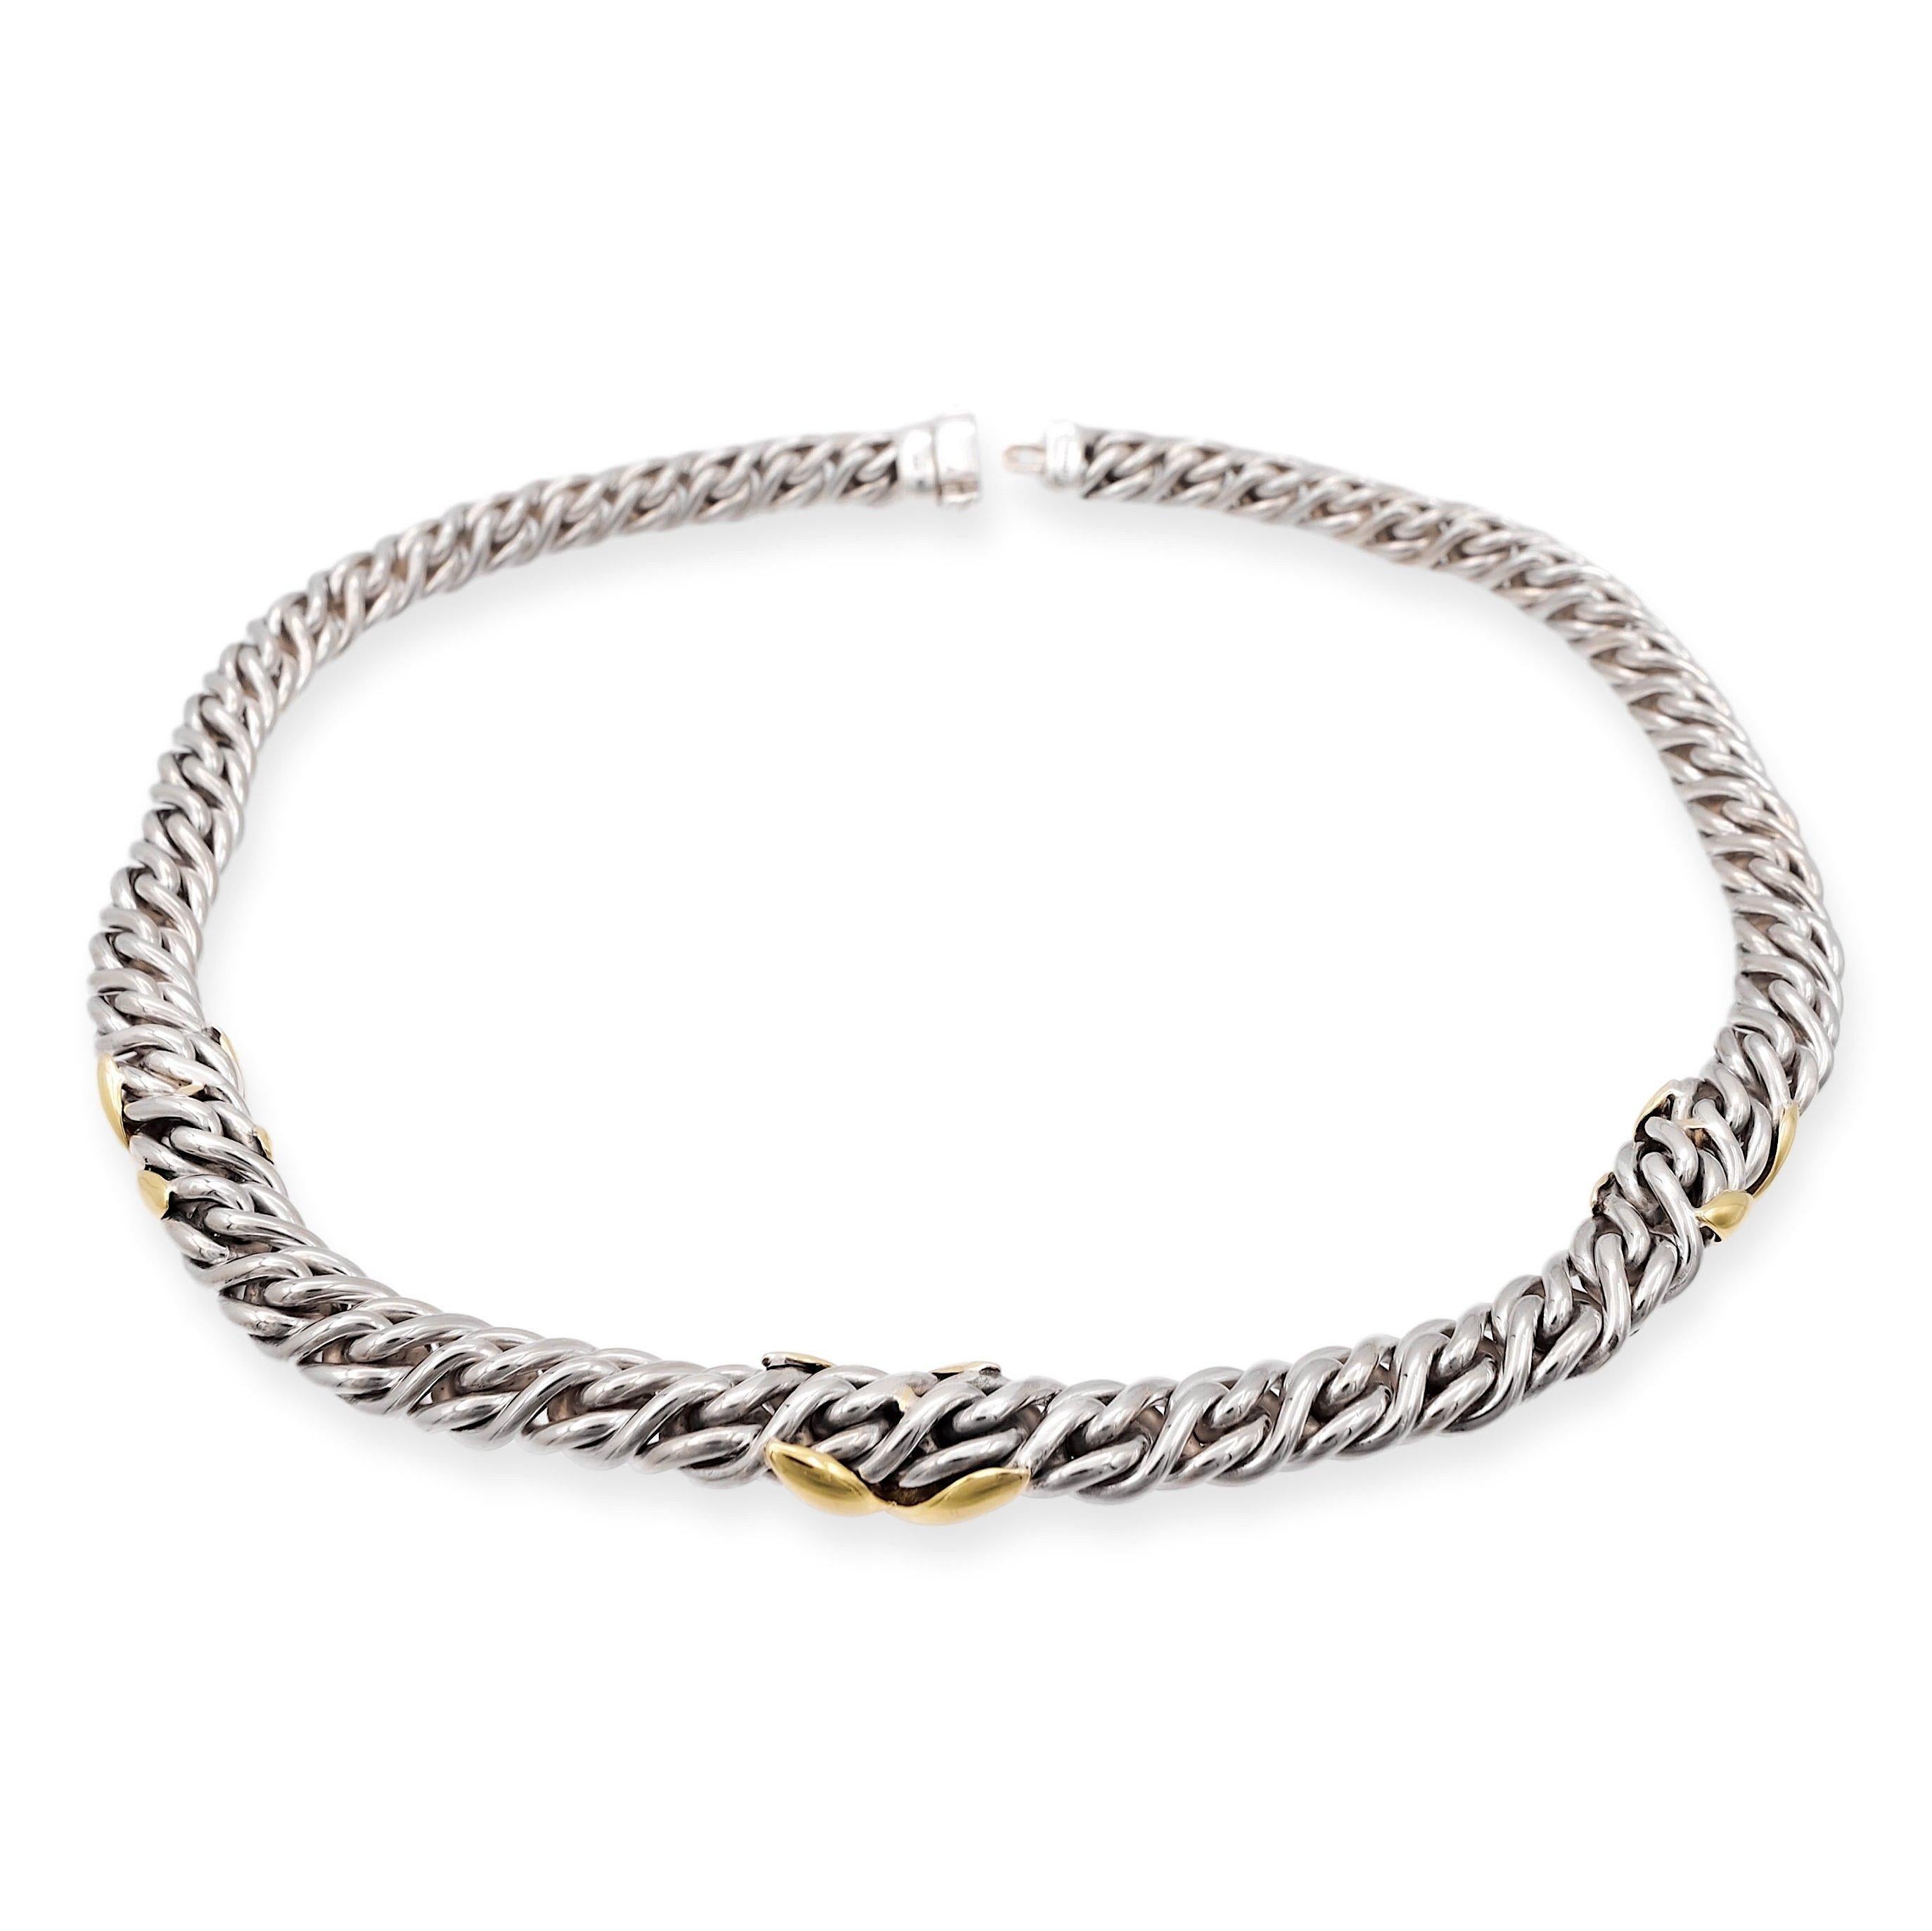 David Yurman necklace from the Lyrica collection finely crafted in sterling silver, showcasing three elegant X motif stations in 18K yellow gold, seamlessly integrated into a classic wheat chain design with a length of 17 inches and a width of 9 mm,